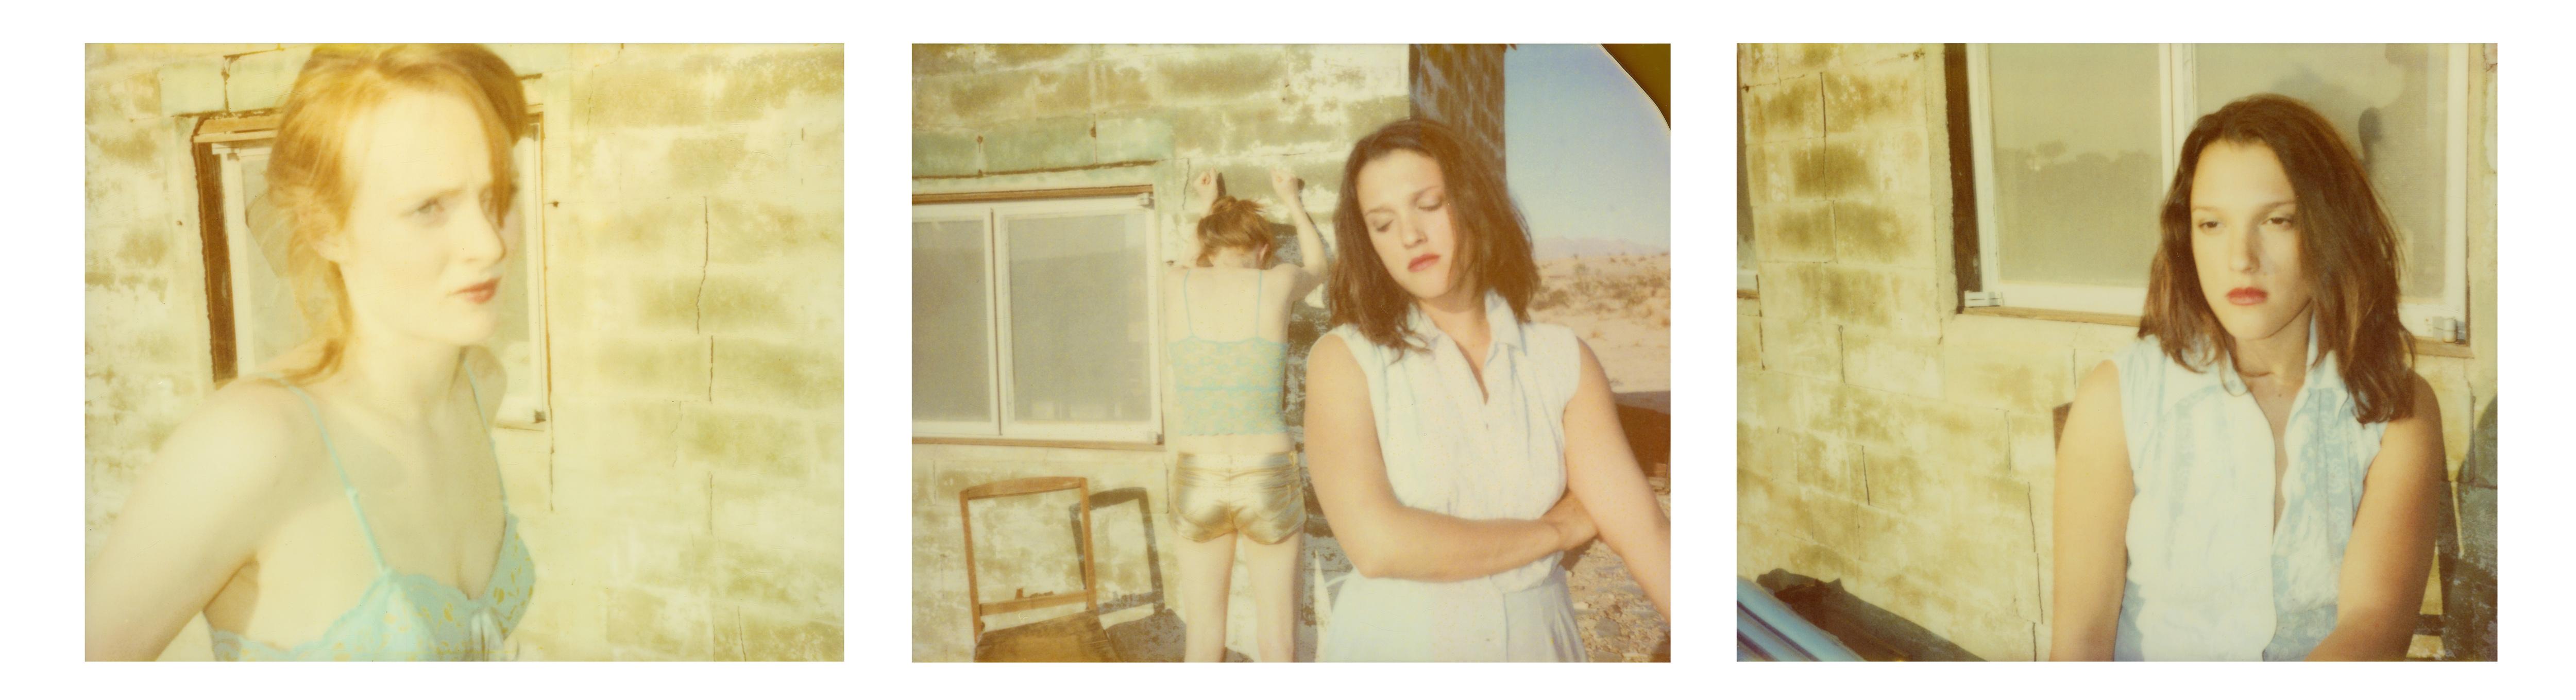 Stefanie Schneider Color Photograph - Cries and Whispers (Till Death do us Part) - triptych - Woman, Polaroid